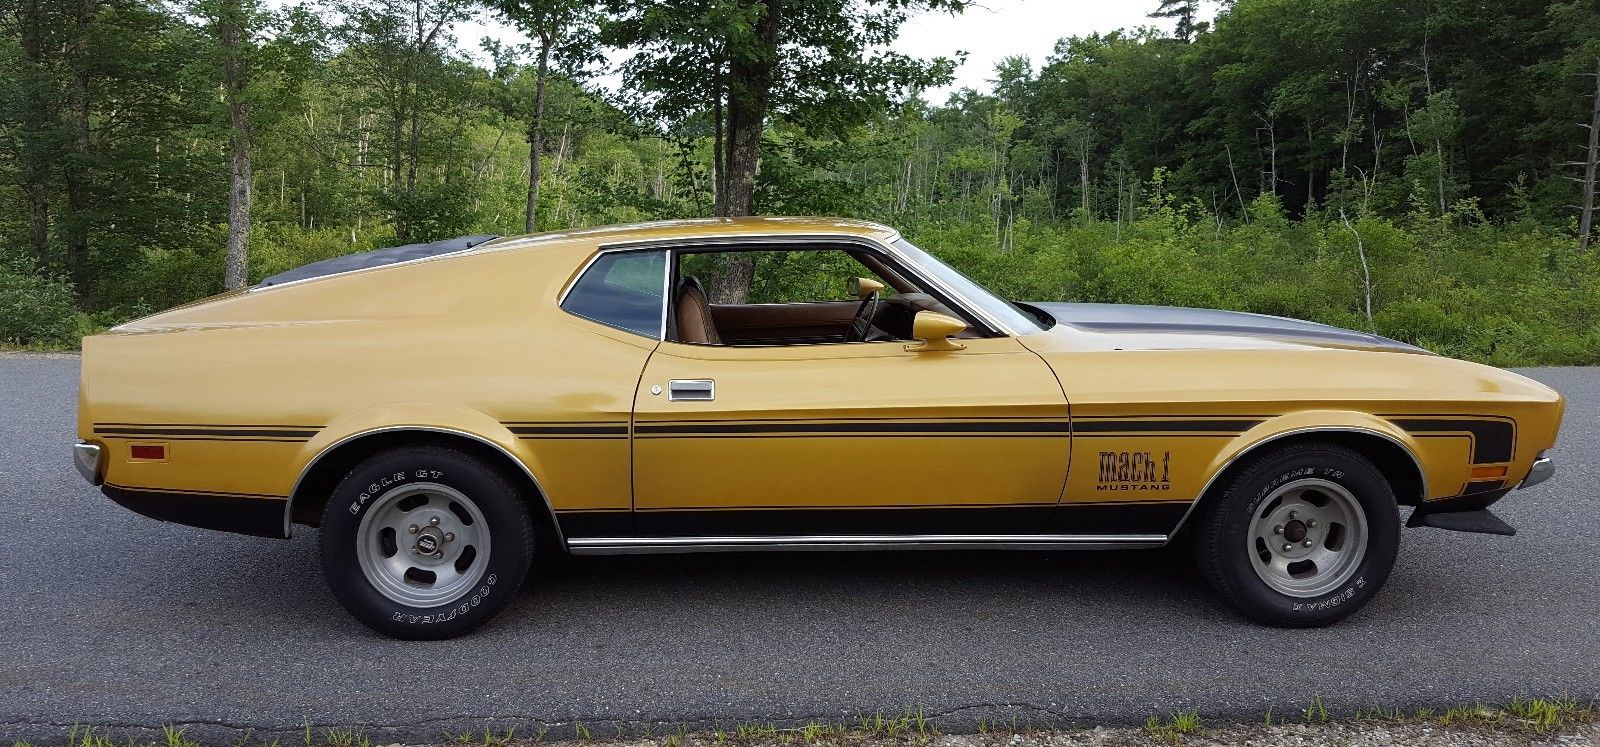 How Much Is A 1972 Mach 1 Worth?